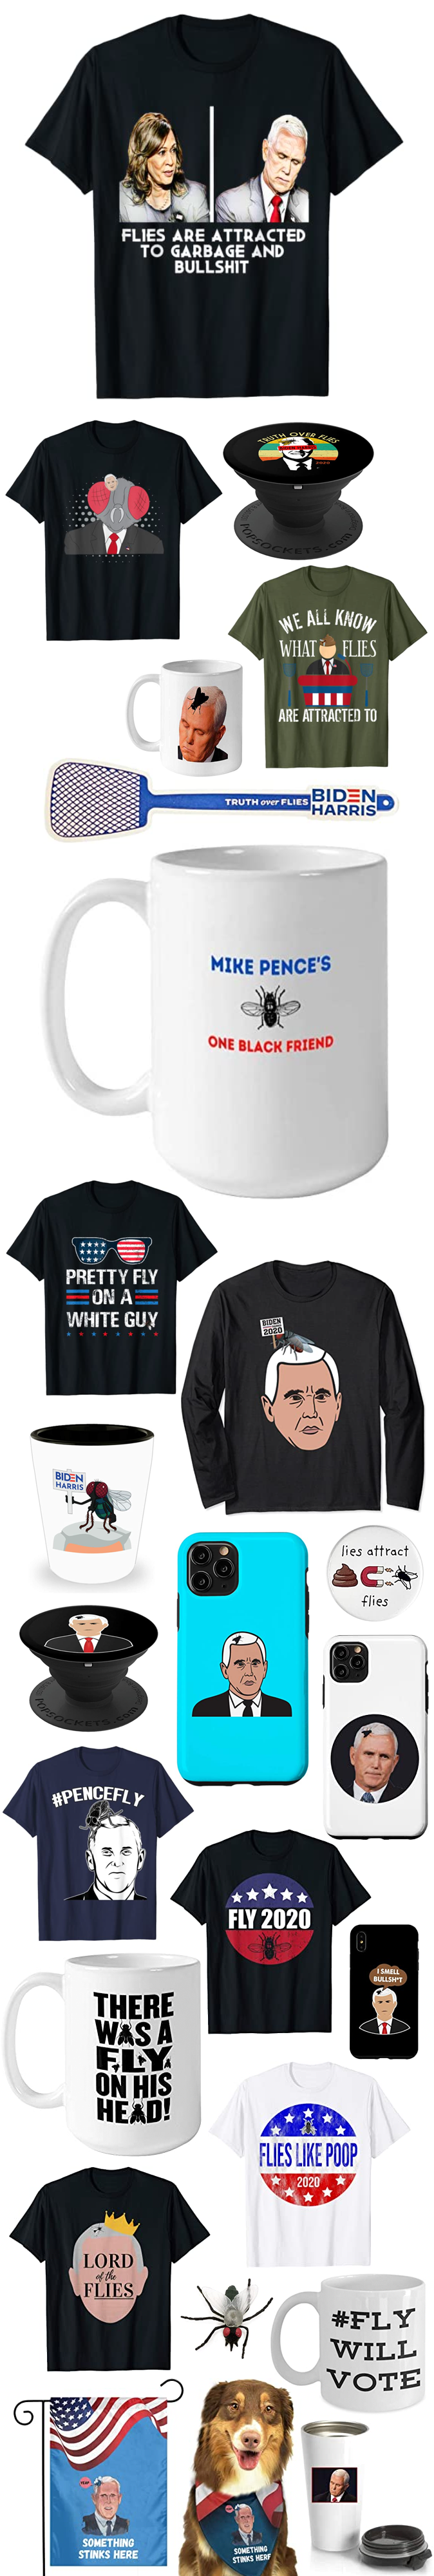 Mike-Pence-Fly-GIfts